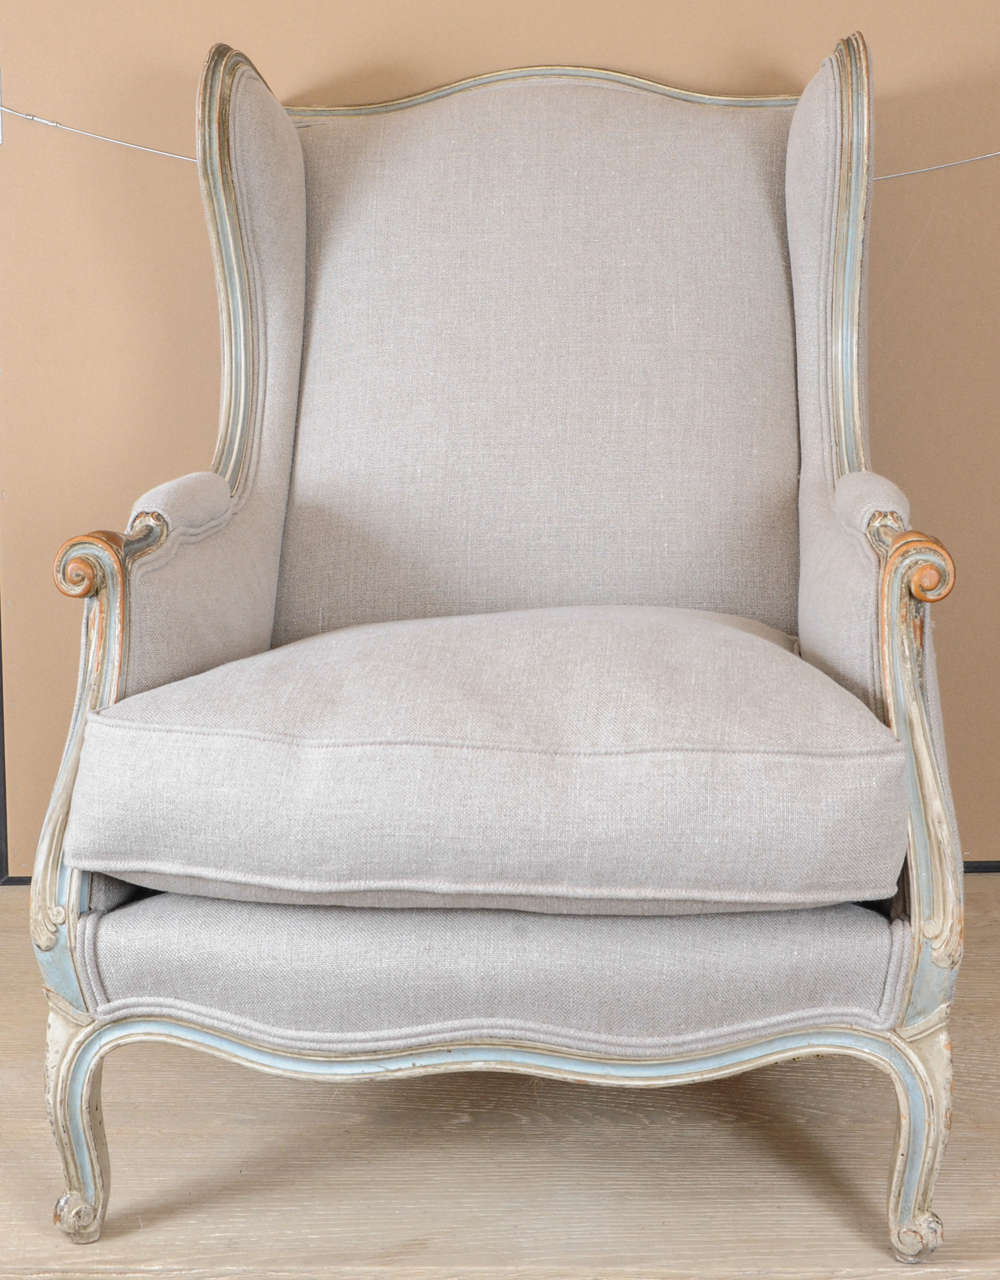 A pair of 2oth. century blue/grey coloured French fauteuils, with a naturel fabrique